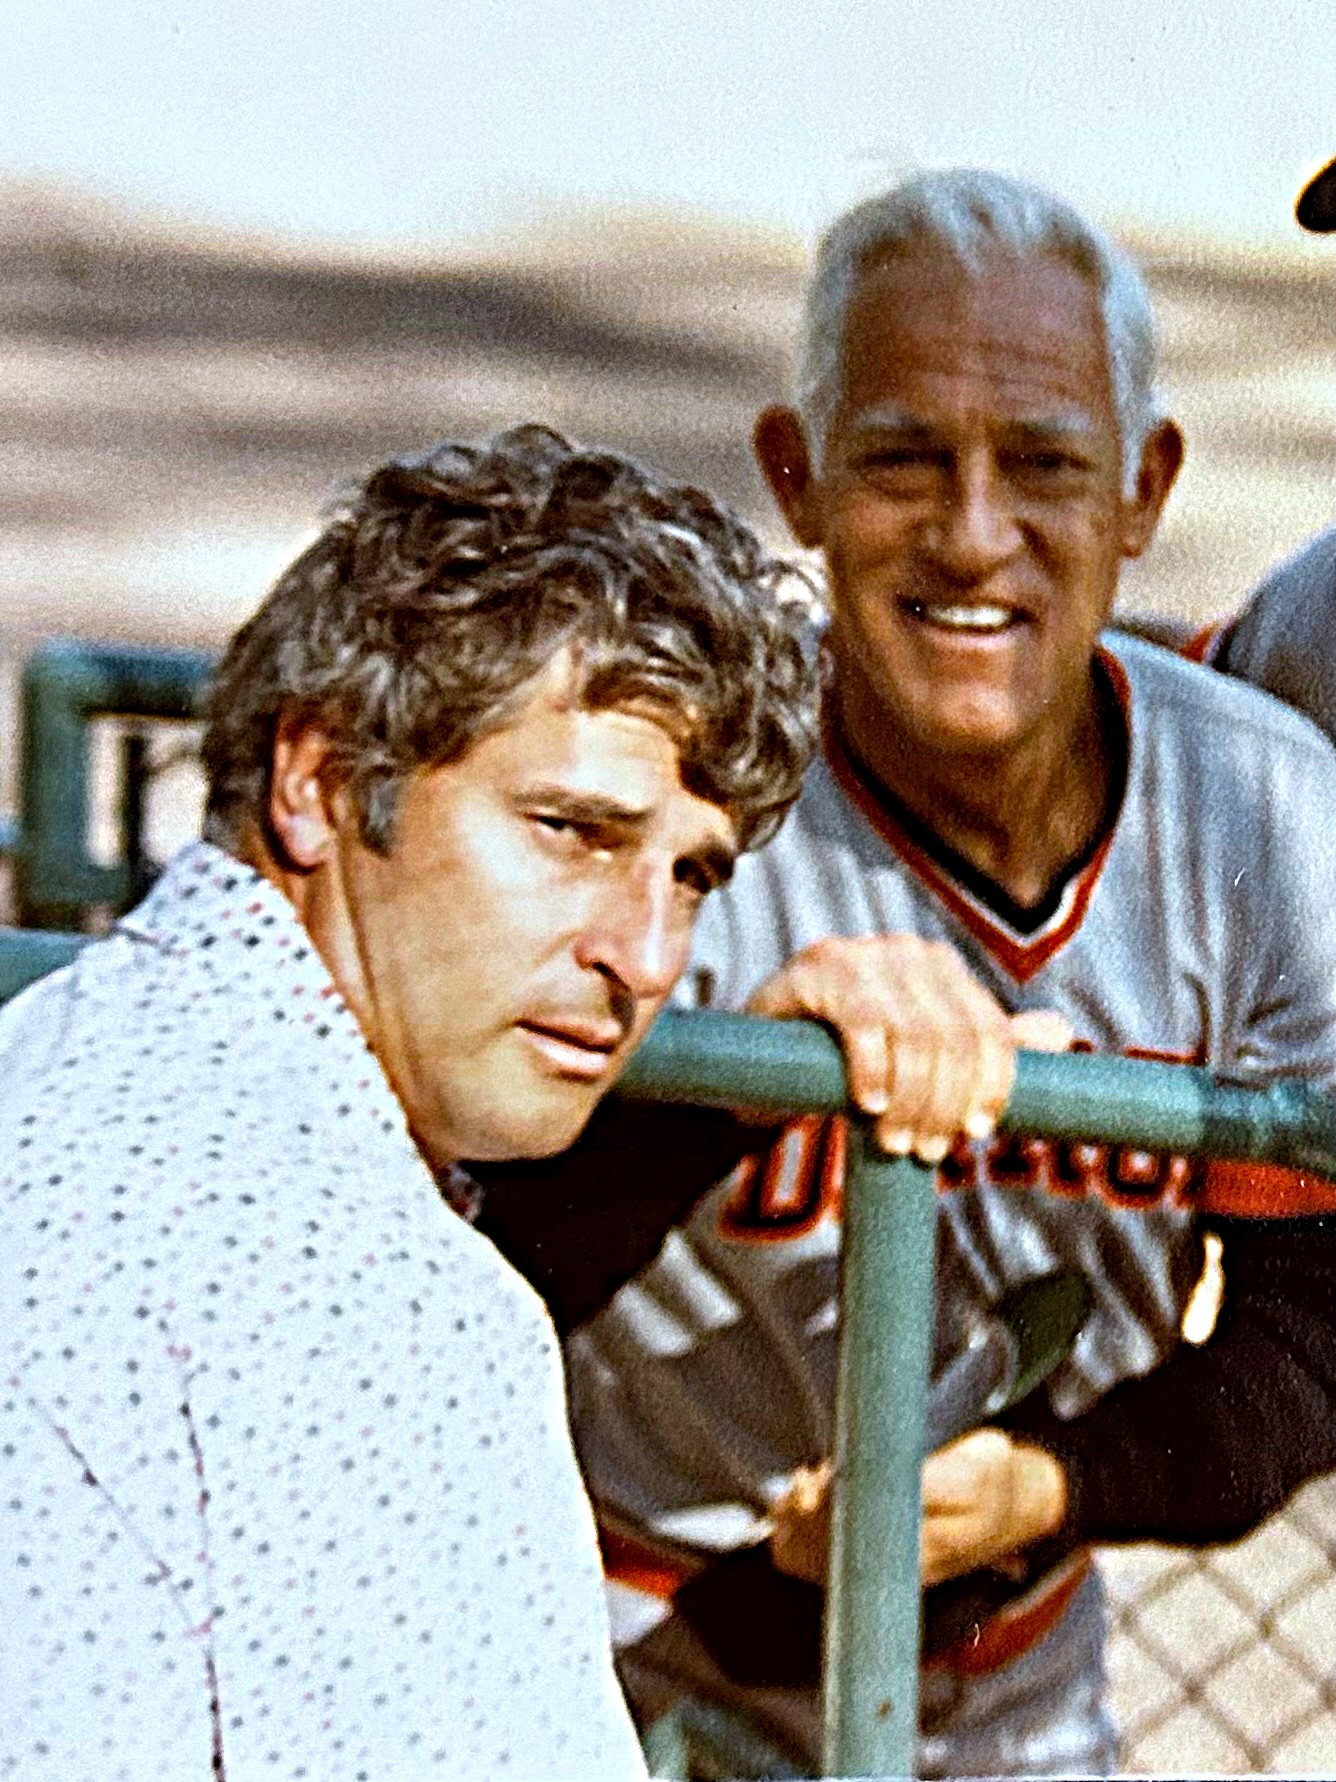 Bob Knight and Sparky Anderson